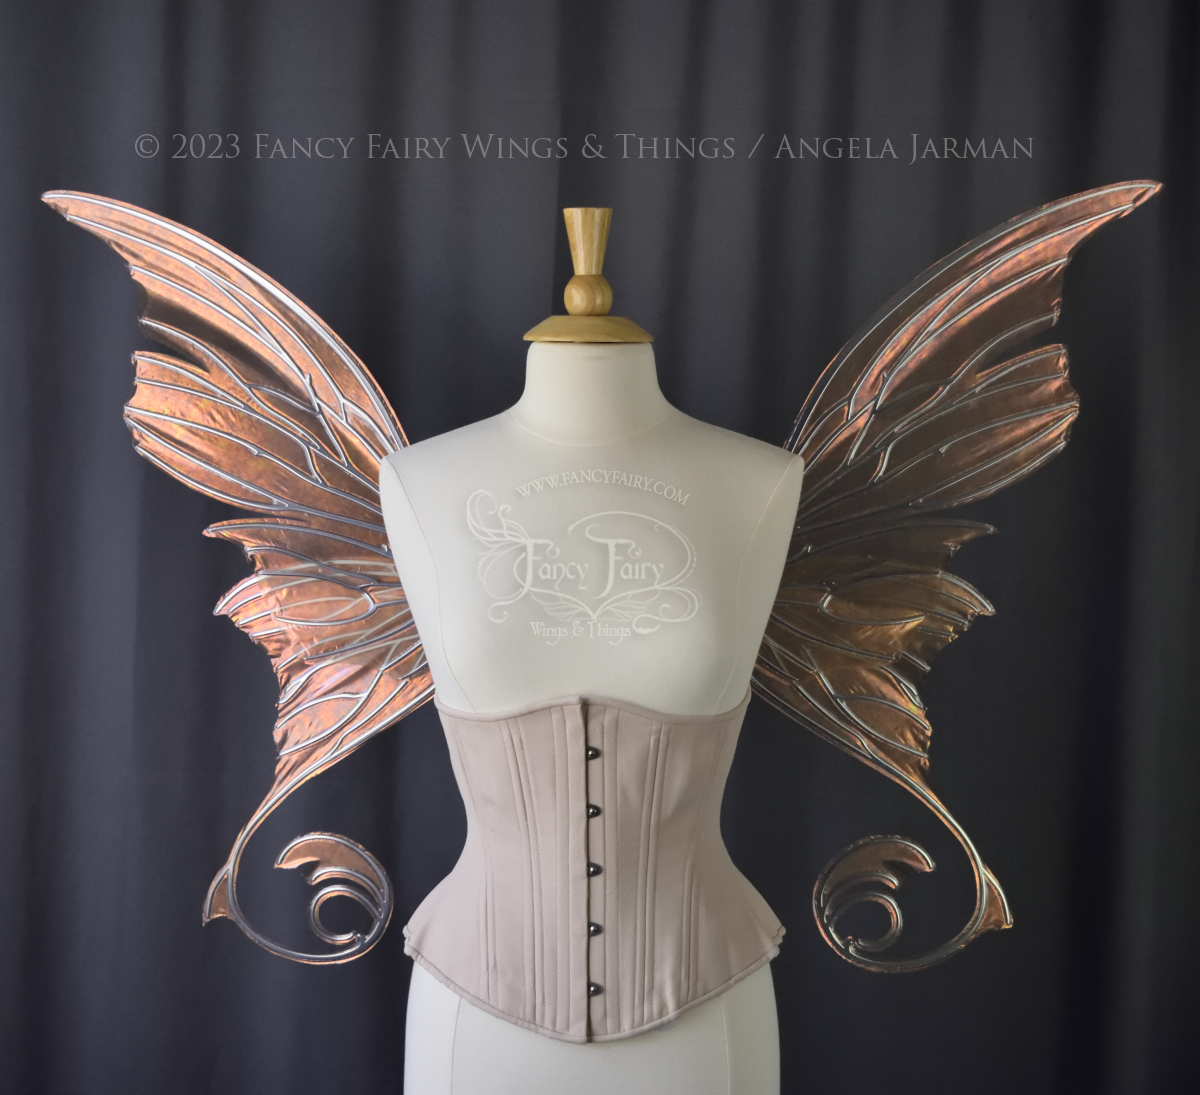 Front view of an ivory dress form wearing an alabaster underbust corset and large rose gold iridescent fairy wings with lots of intricate silver veins, some have 'thorns'. Upper panels curve slightly downwards along top edge with pointy tips, bottom panels have tails. Dark grey background